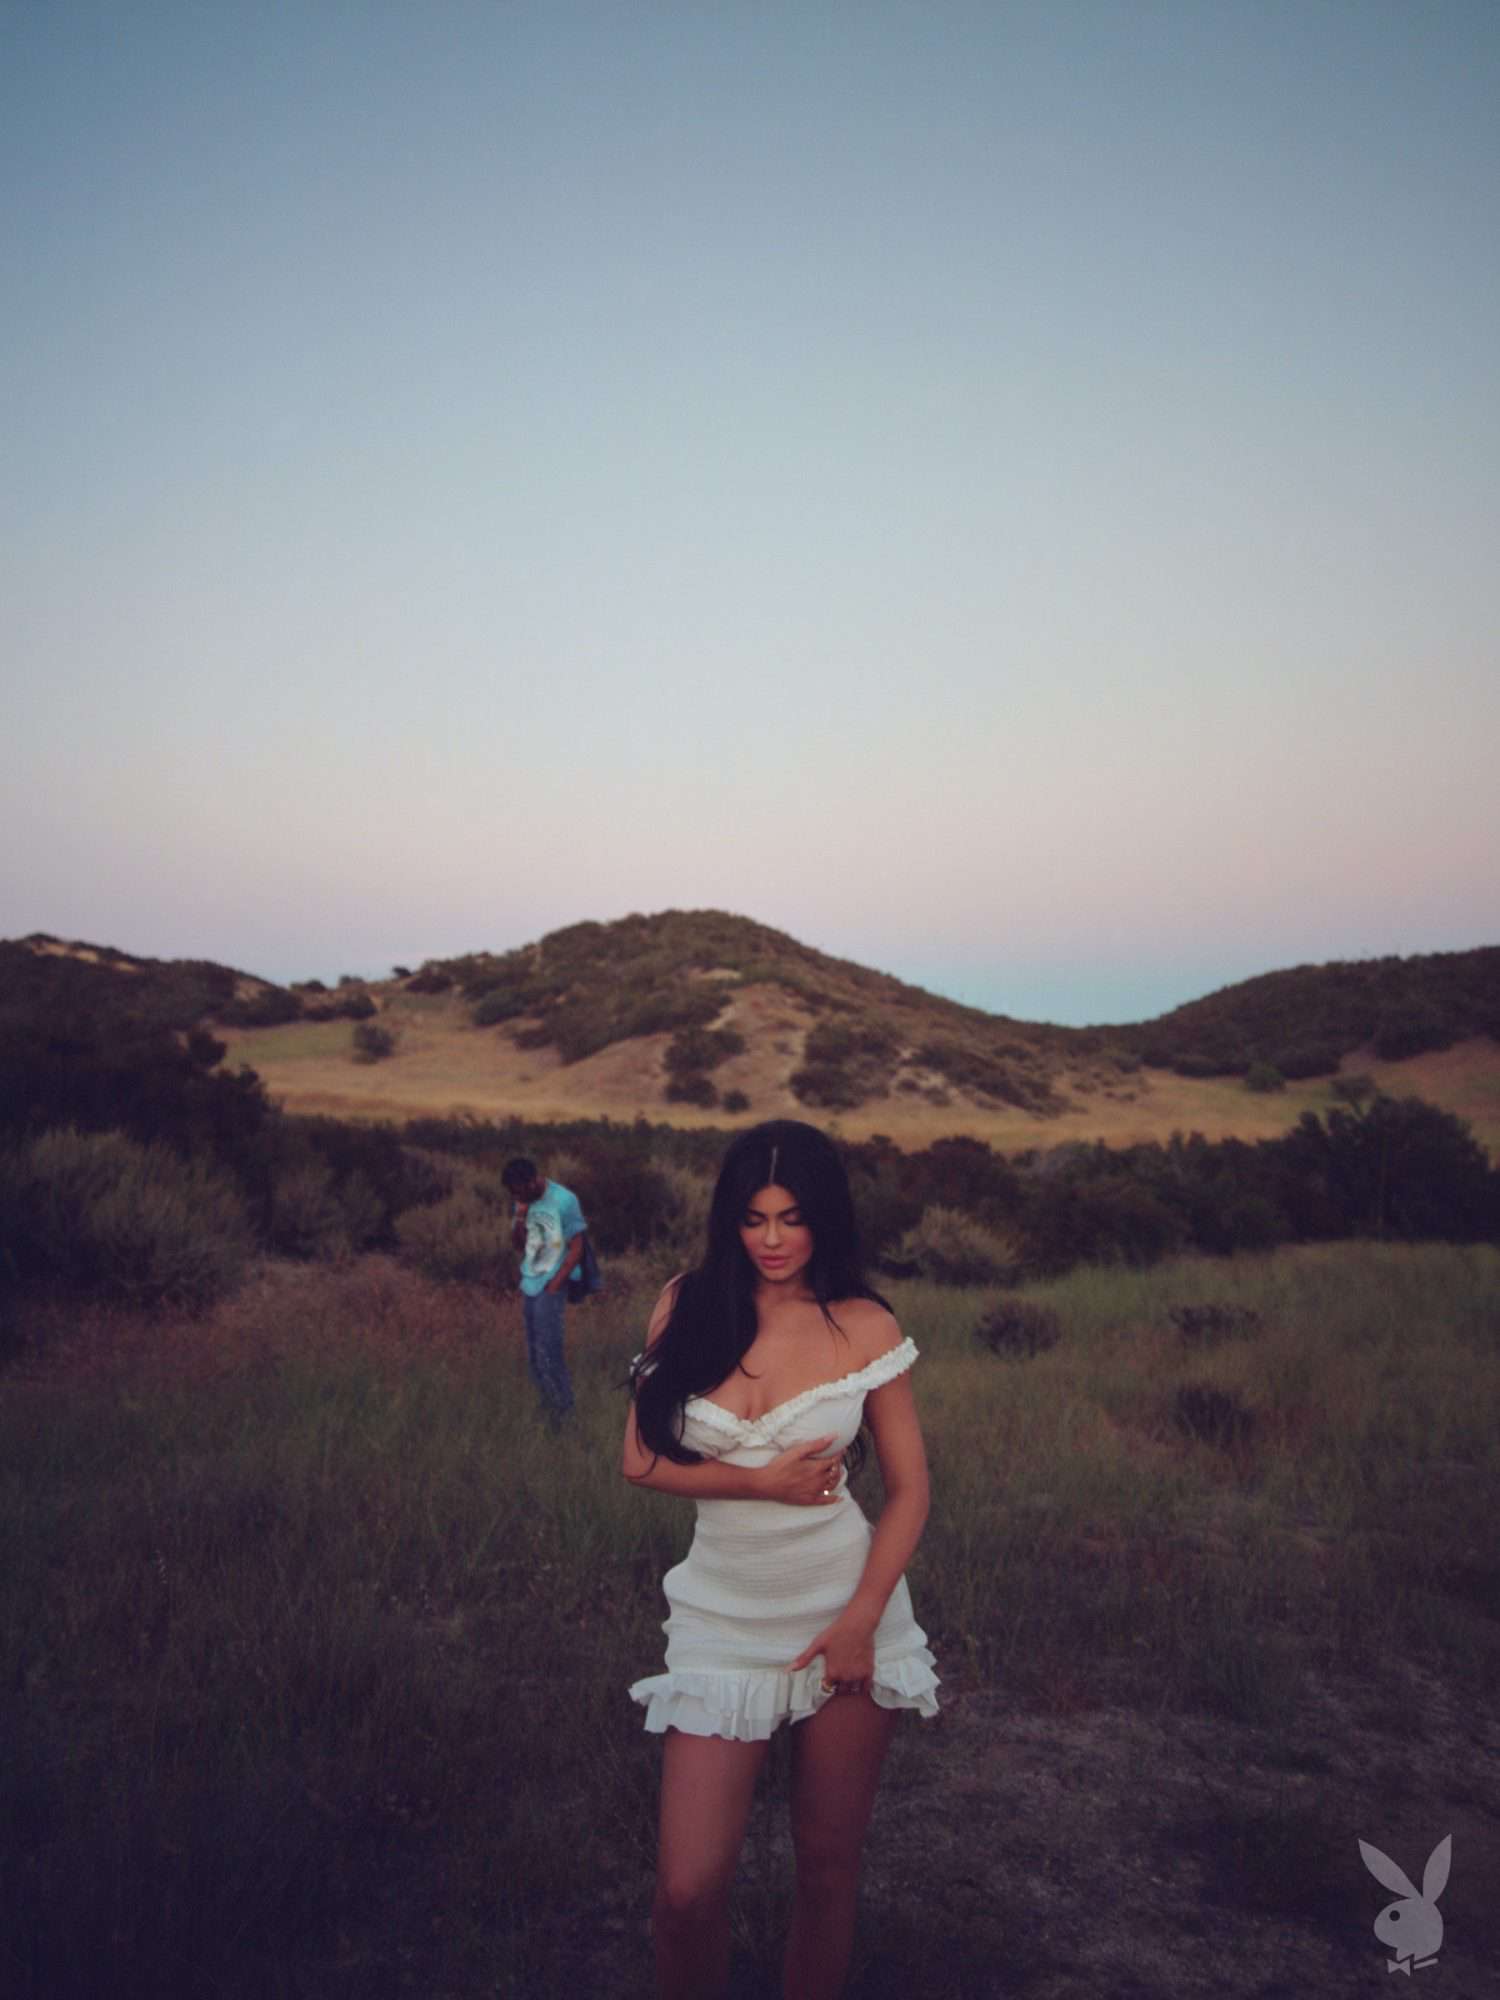 Kylie Jenner for Playboy